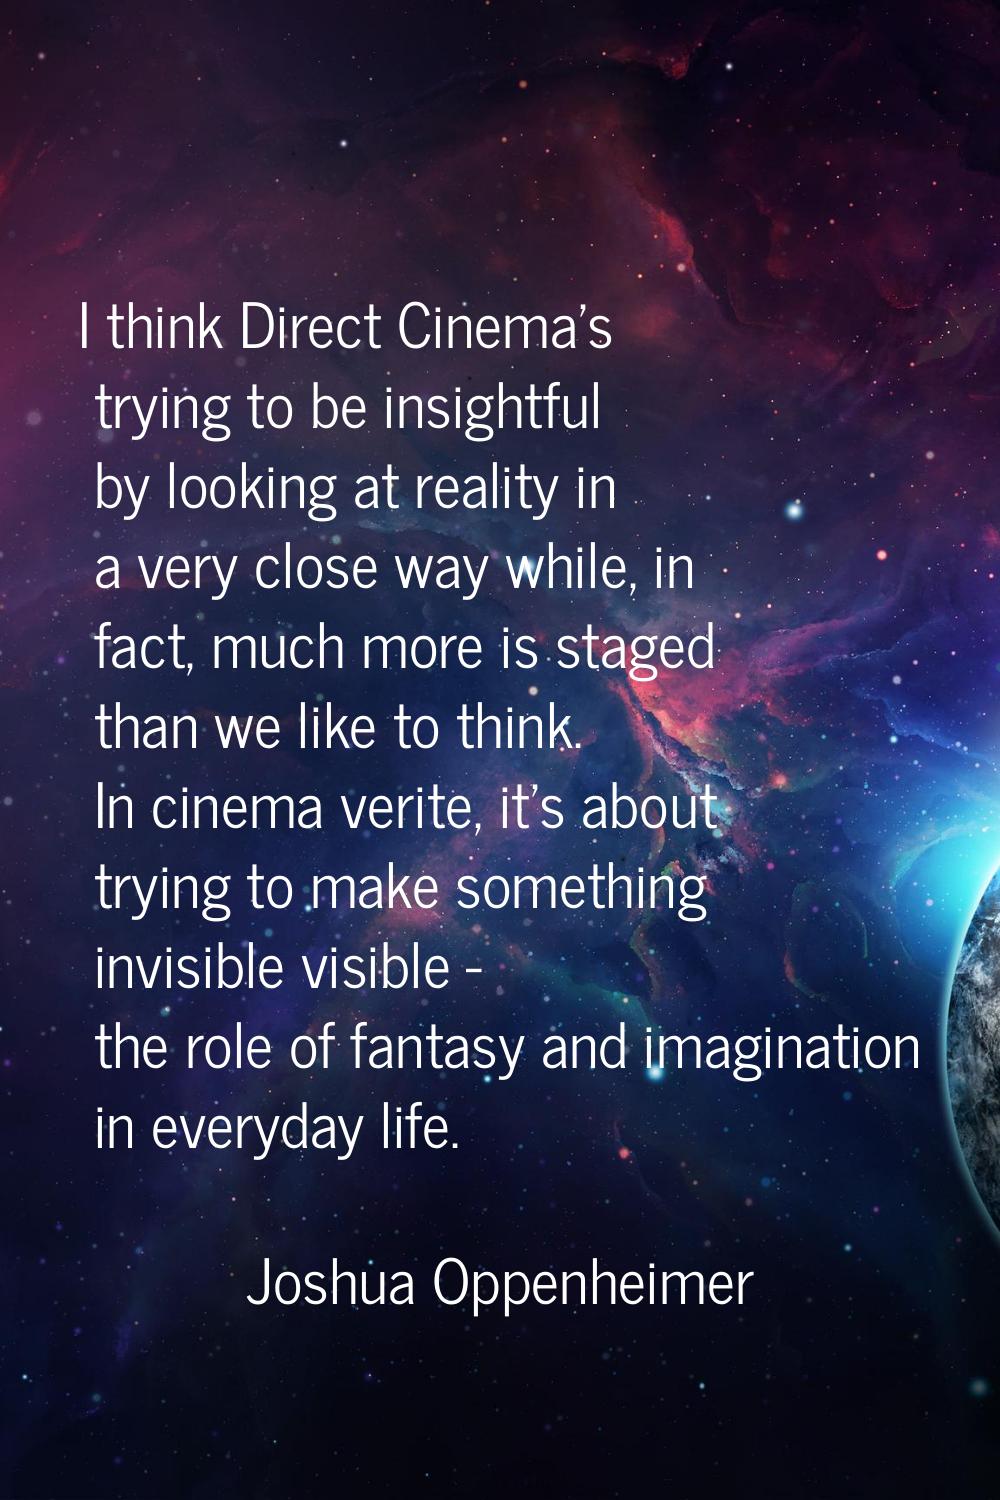 I think Direct Cinema's trying to be insightful by looking at reality in a very close way while, in